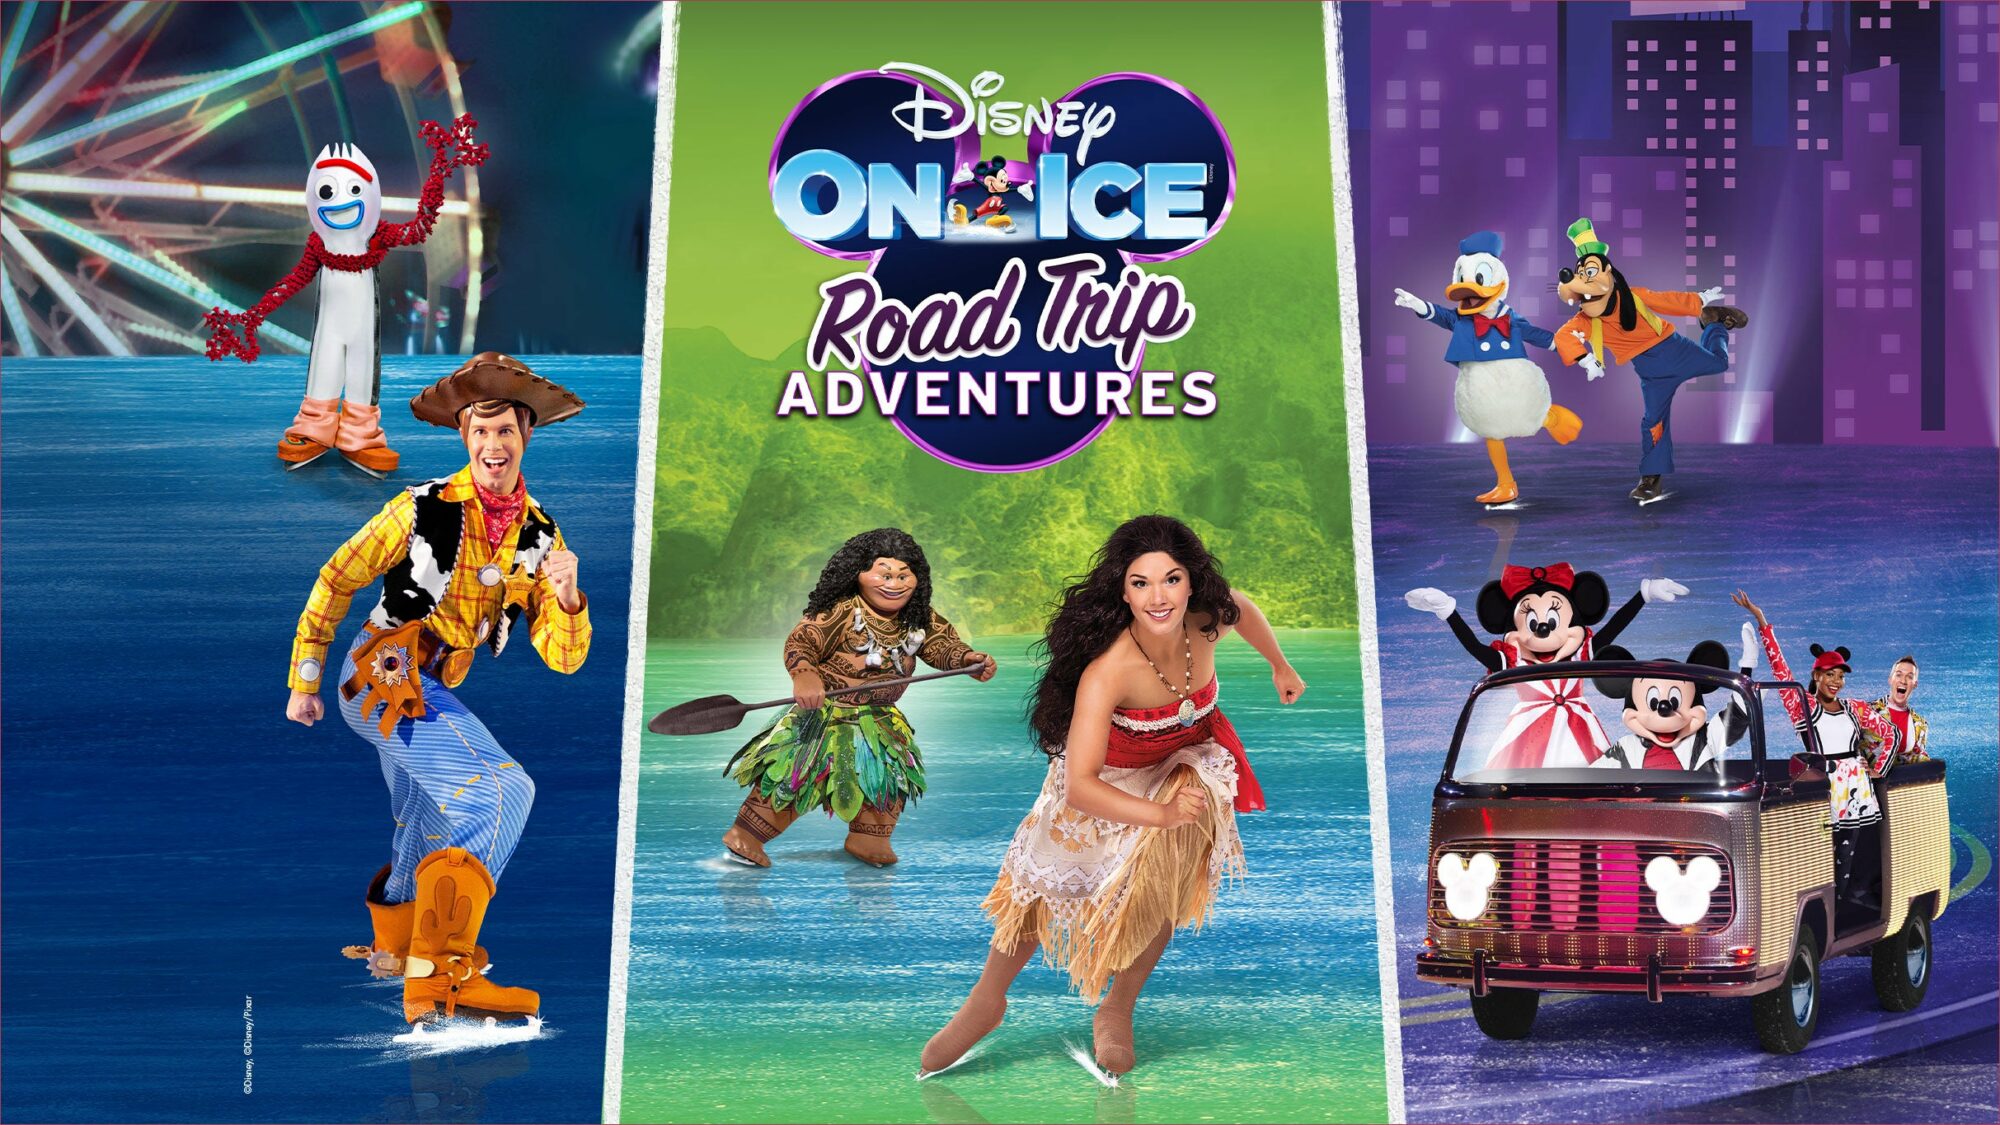 Image name Disney On Ice presents Road Trip Adventures at Utilita Arena Sheffield Sheffield the 3 image from the post Events in Yorkshire.com.